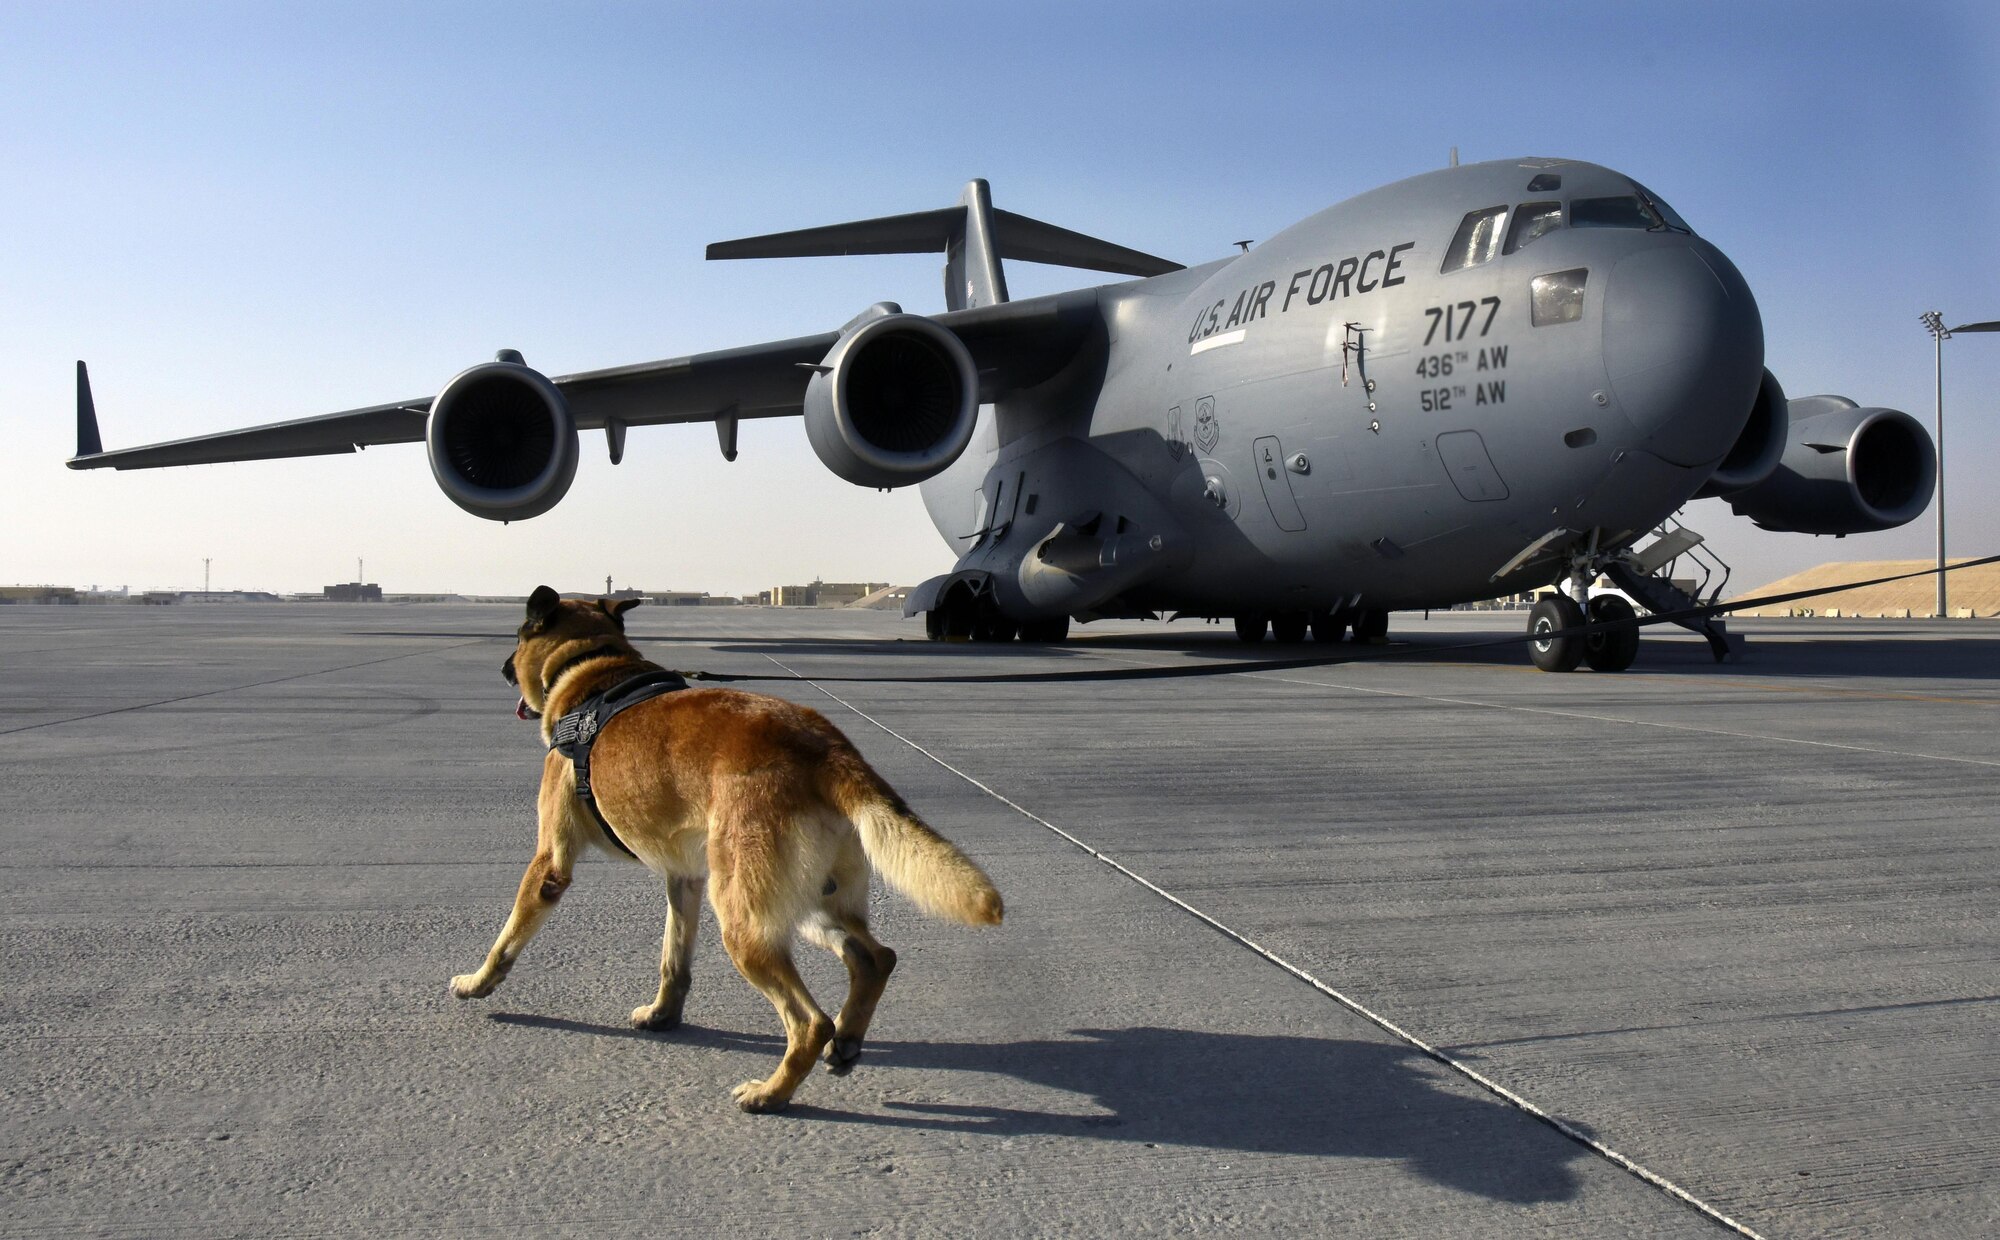 U.S. Air Force military working dog Ben, with the 379th Expeditionary Security Forces Squadron, runs towards a C-17 Globemaster III during detection training at Al Udeid Air Base, Qatar, April 15, 2017. The training was designed to introduce the canines to a new environment that they may not have had previous exposure to. (U.S. Air Force photo by Senior Airman Cynthia A. Innocenti)